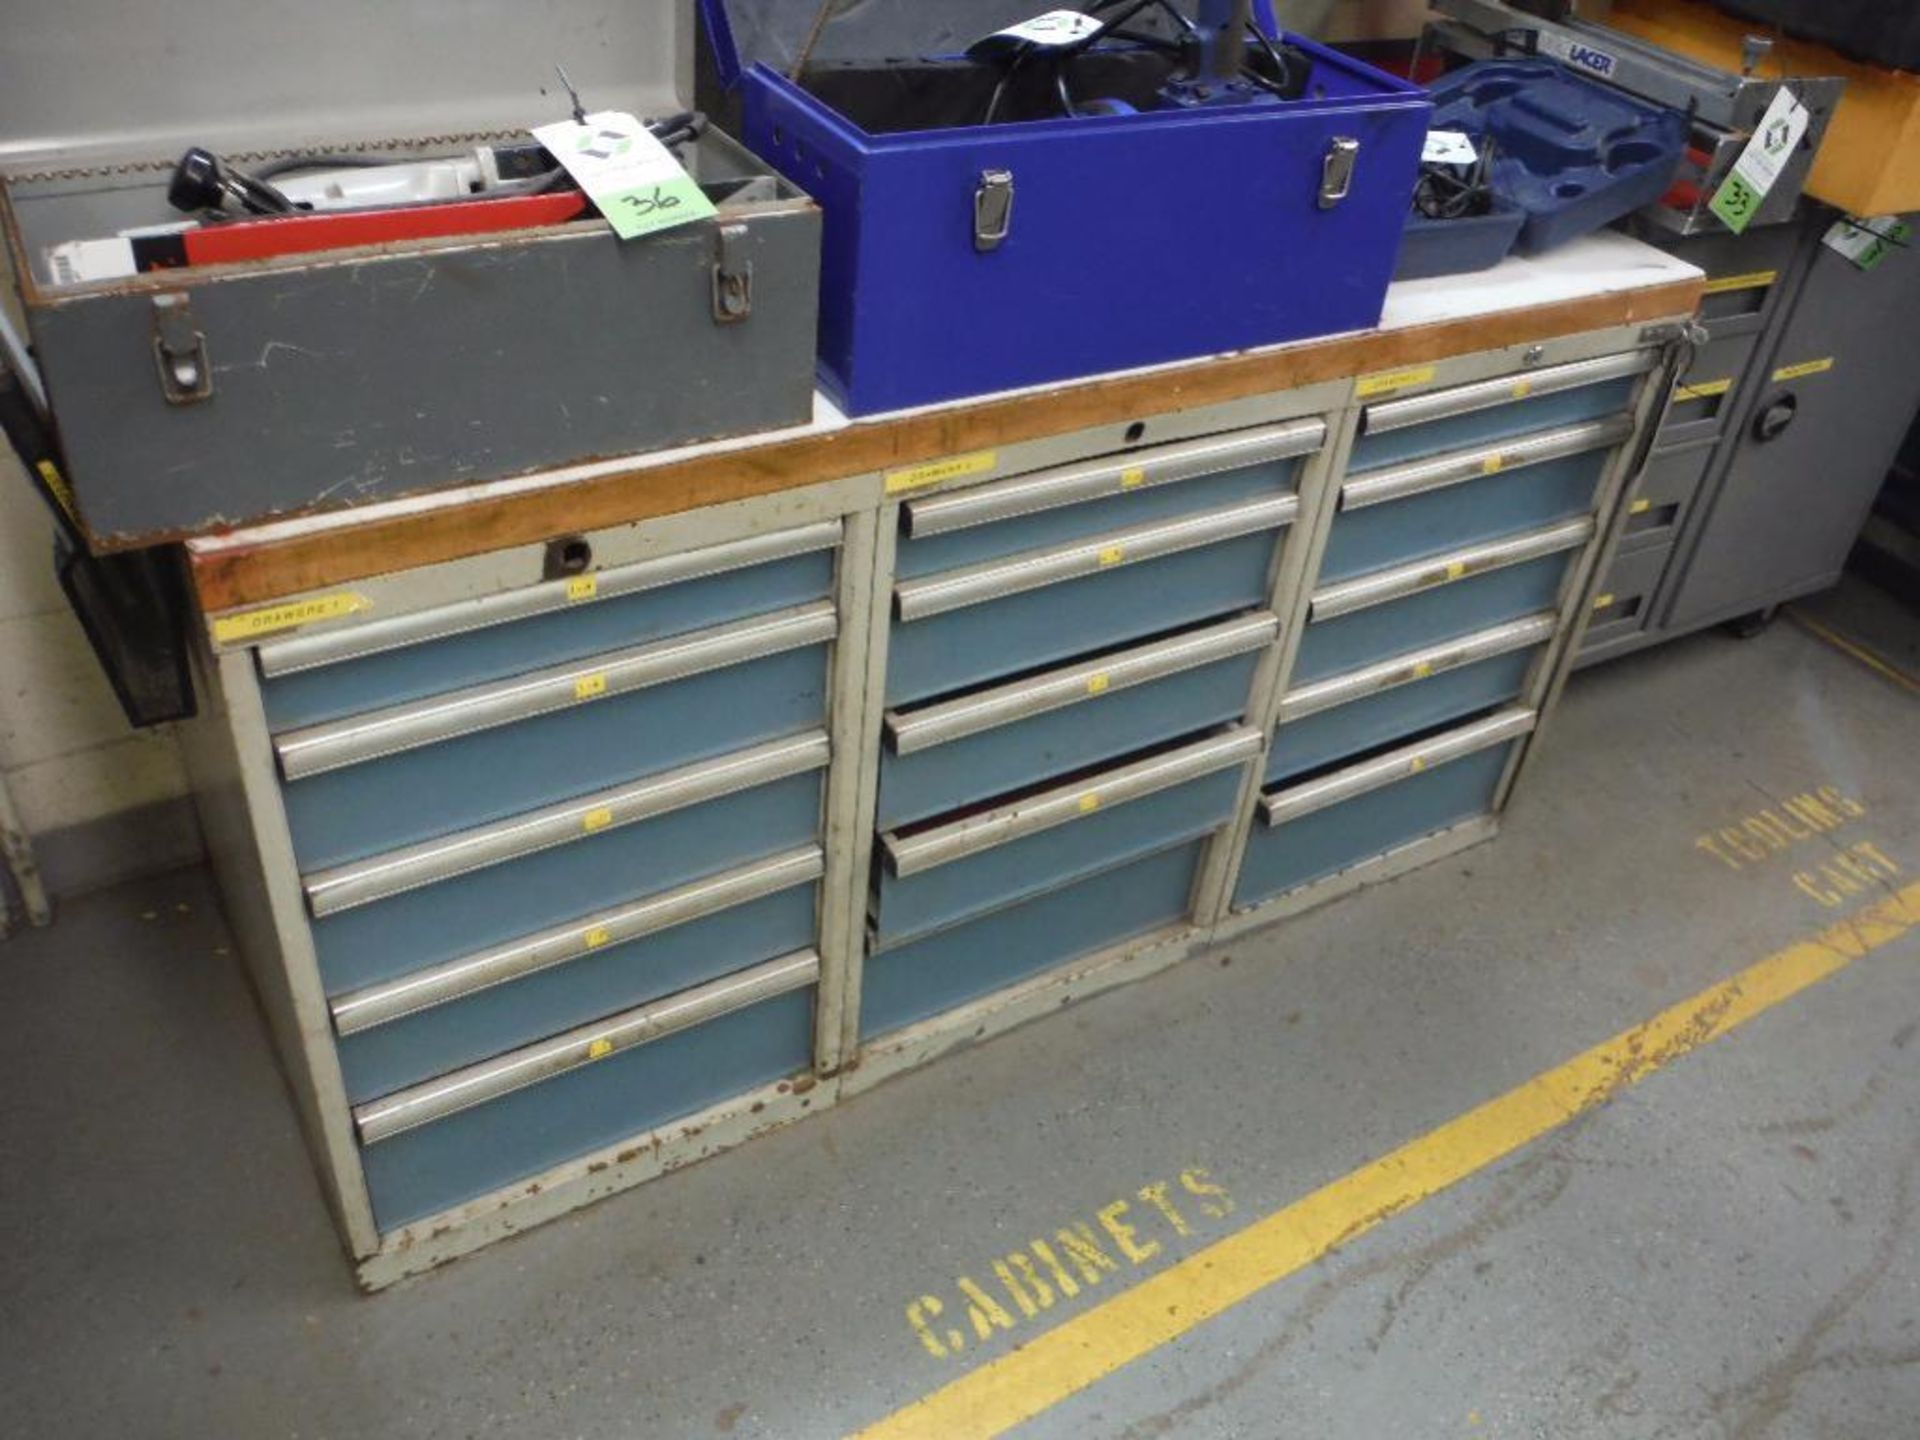 (3) 5 drawer cabinets, 22 in. long x 29 in. deep x 34 in. tall, with bench top, and contents, some